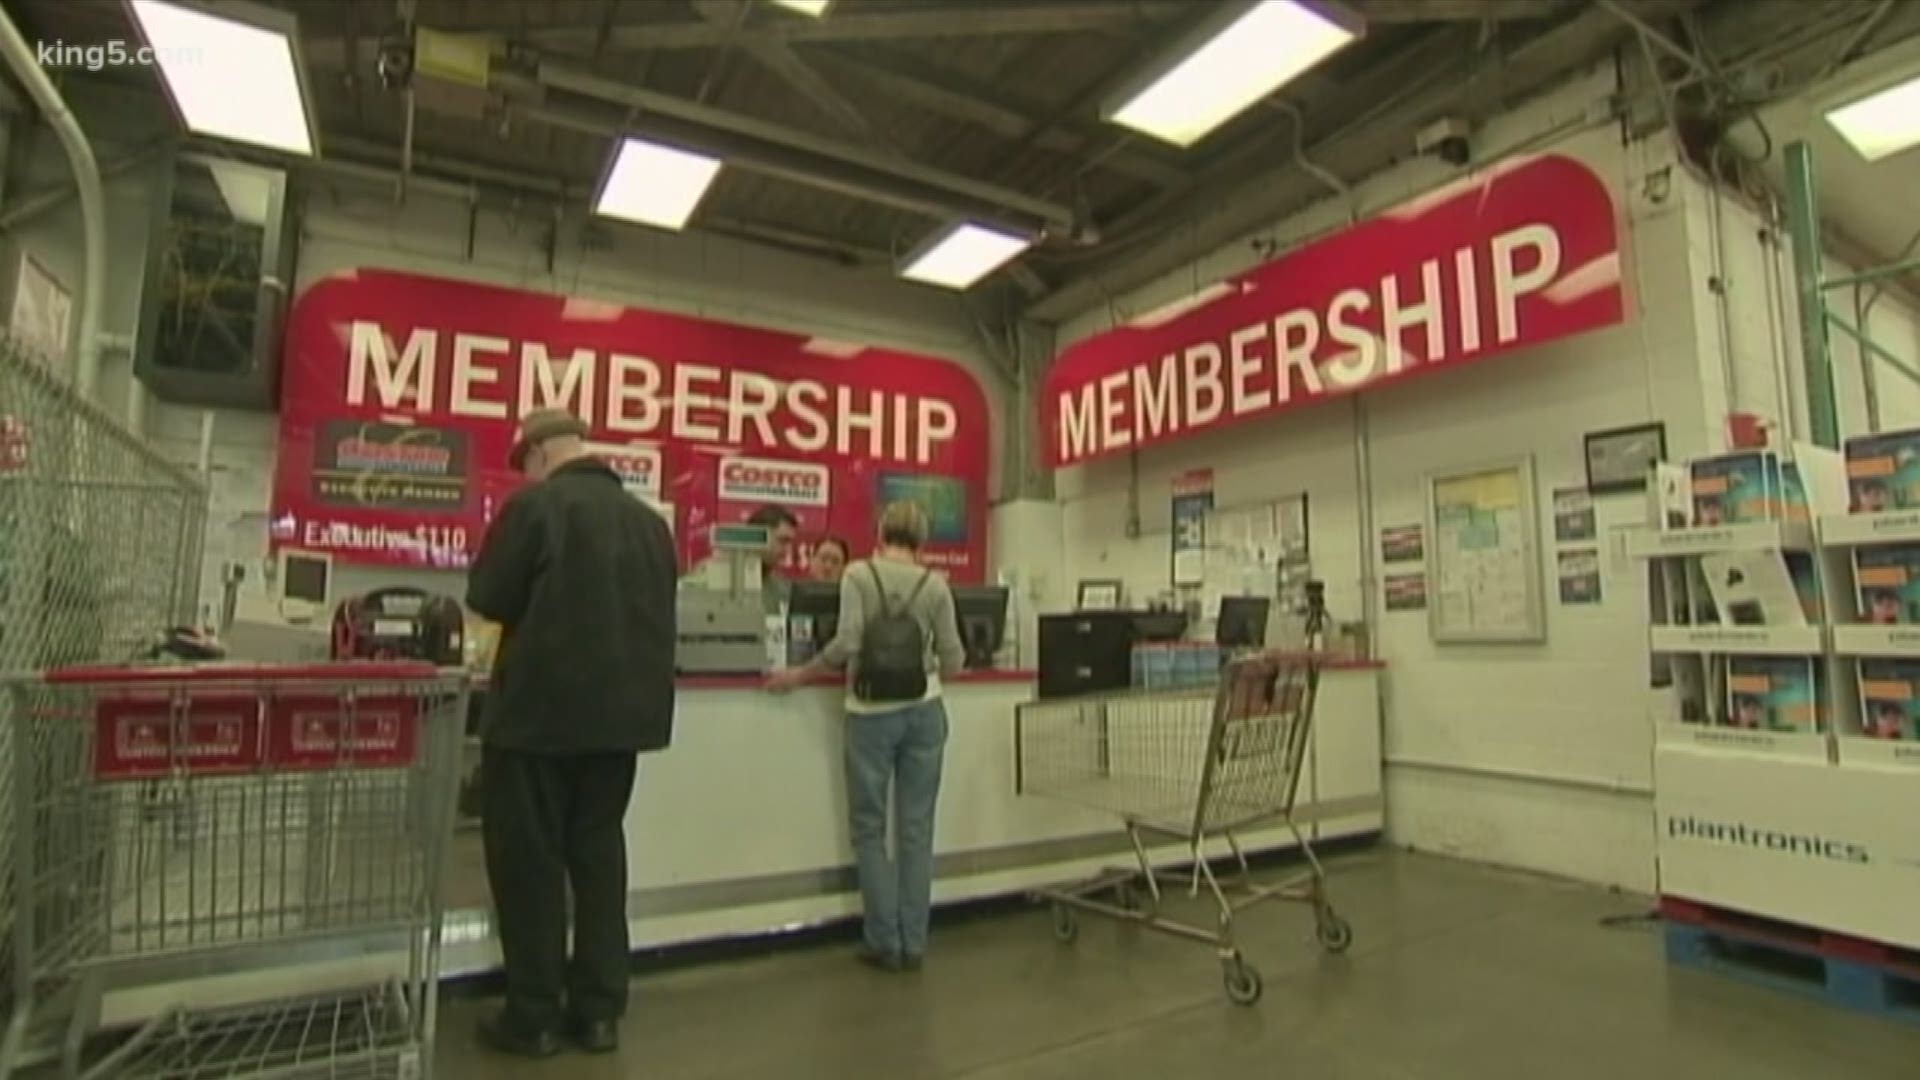 Starting Friday Costco will temporarily allow two people per membership card to go into the store.